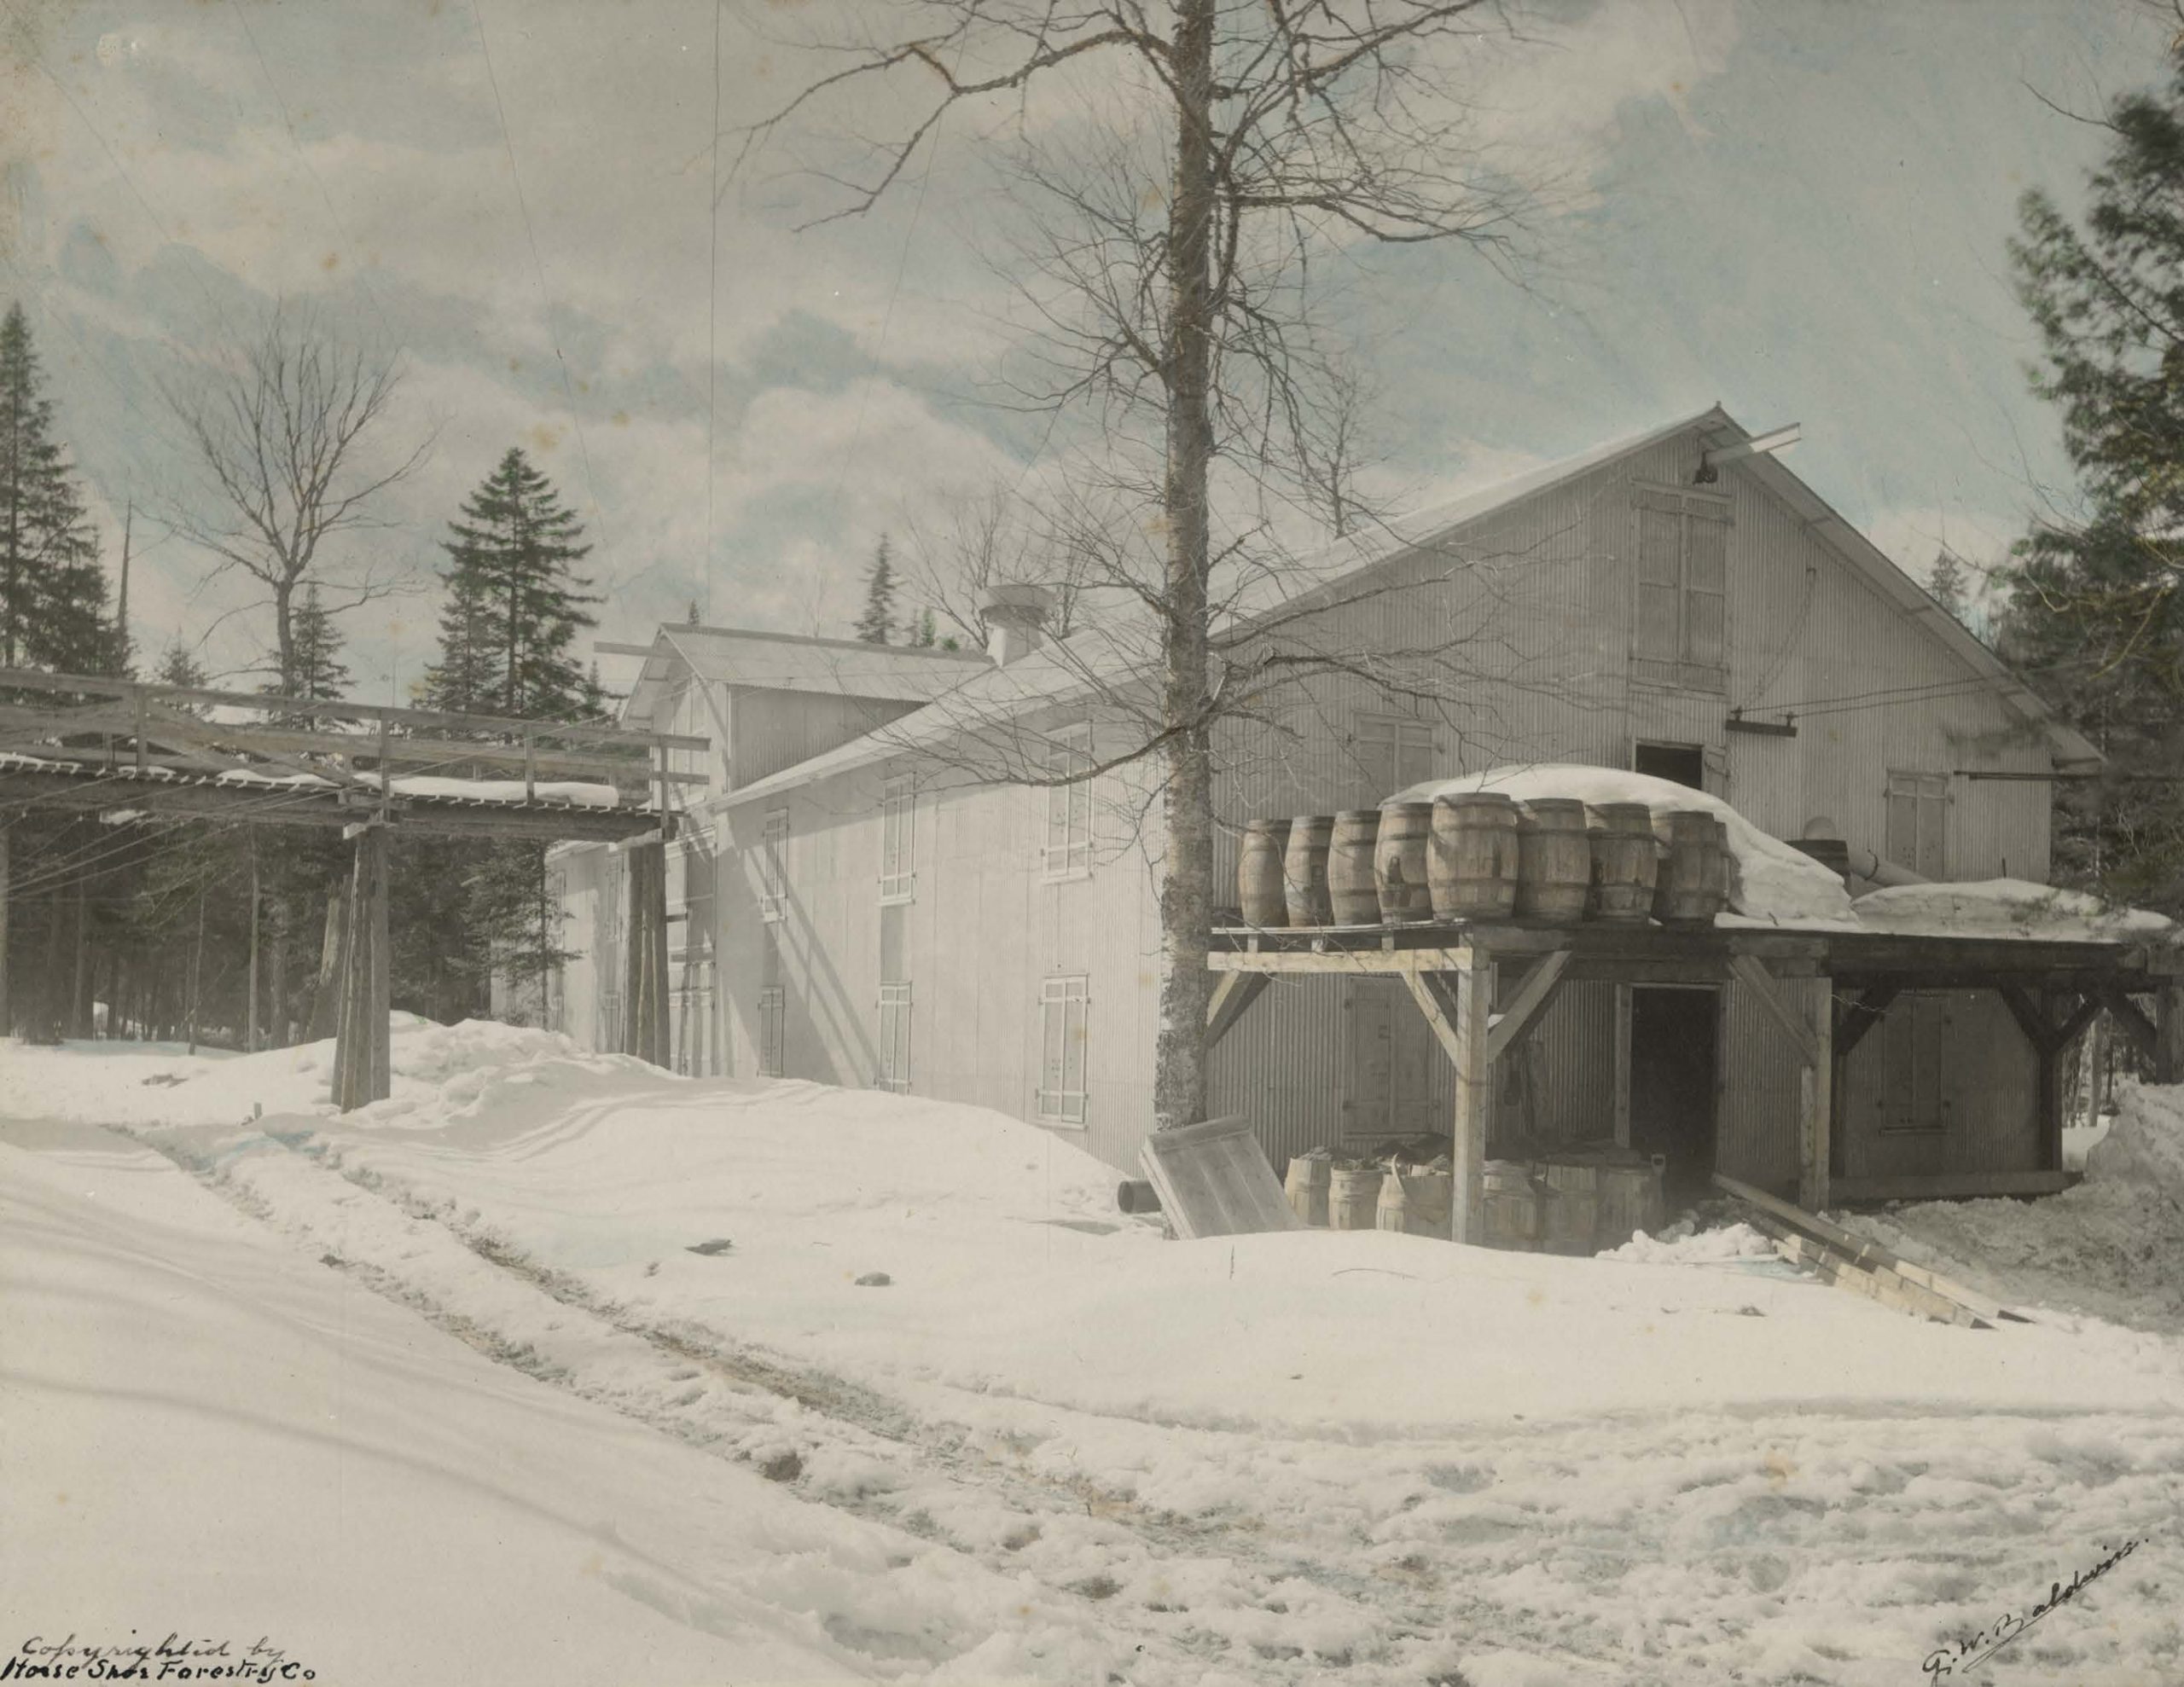 Historic photograph of Horseshoe Forestry Company building